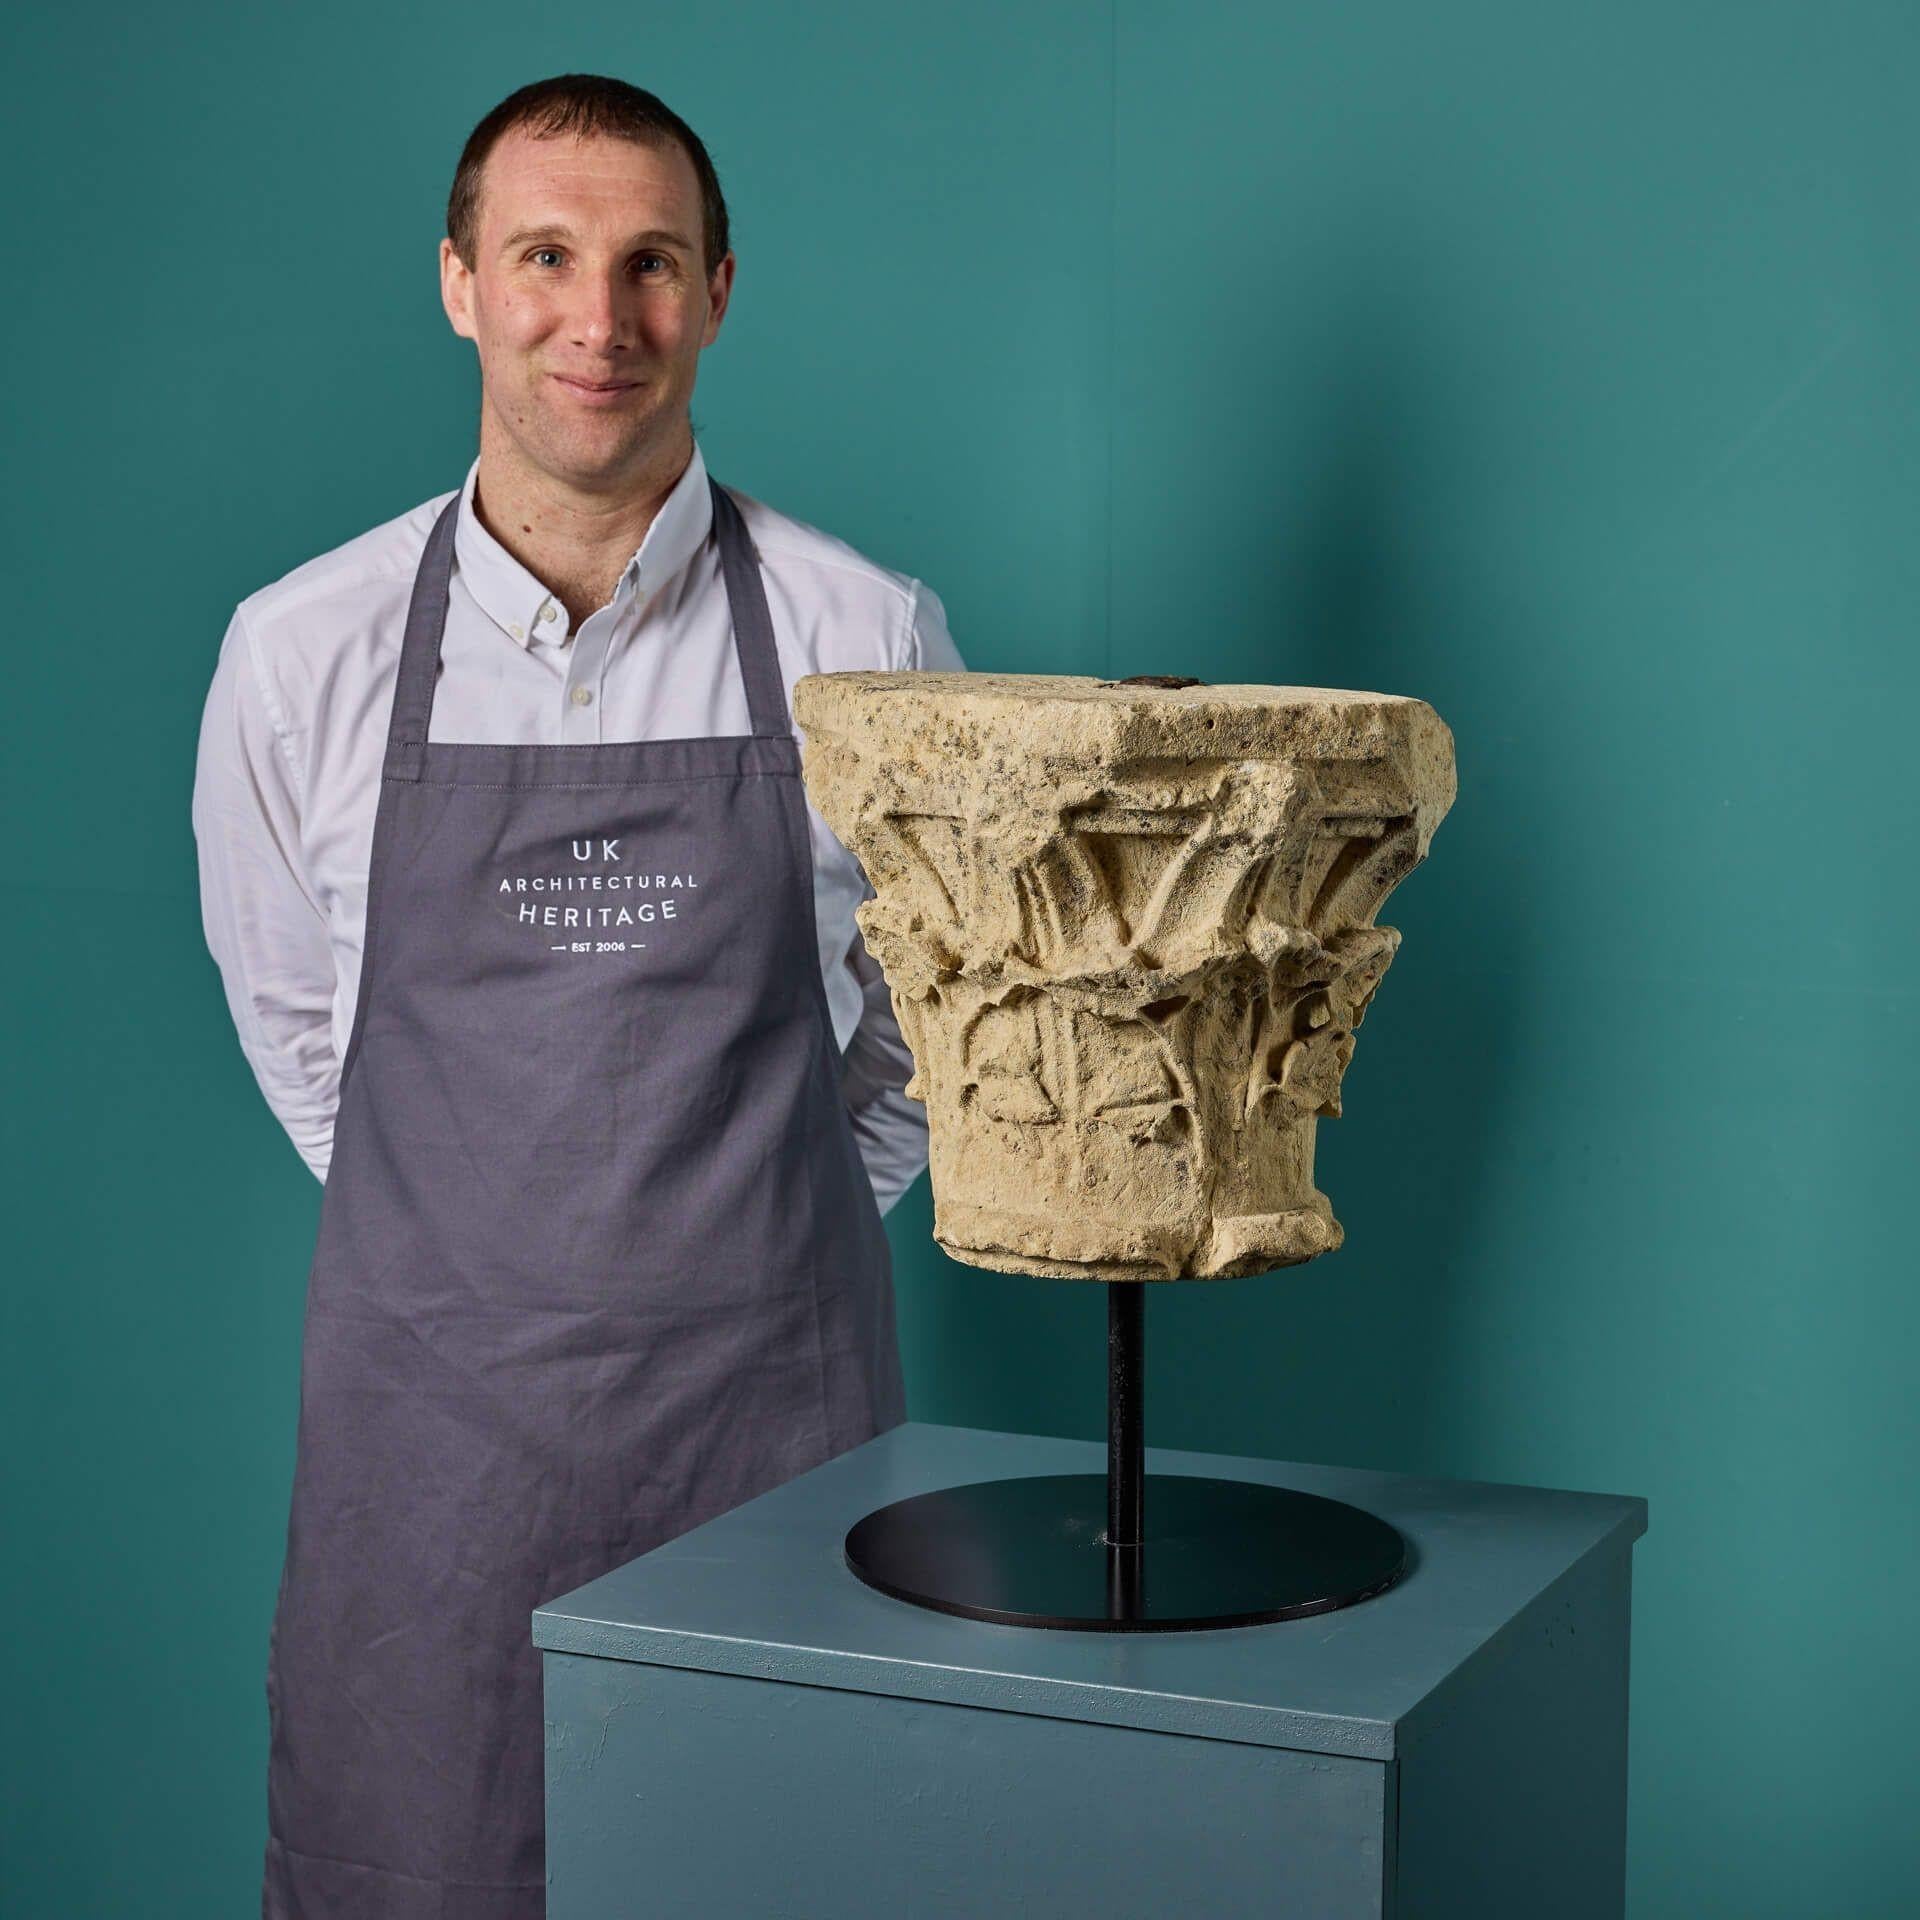 This weathered English Romanesque limestone capital is centuries old, dating from the Norman era of the 11th and 12th centuries. Originating from Oxfordshire, it is decoratively hand carved, perhaps once forming part of an interior or exterior of a